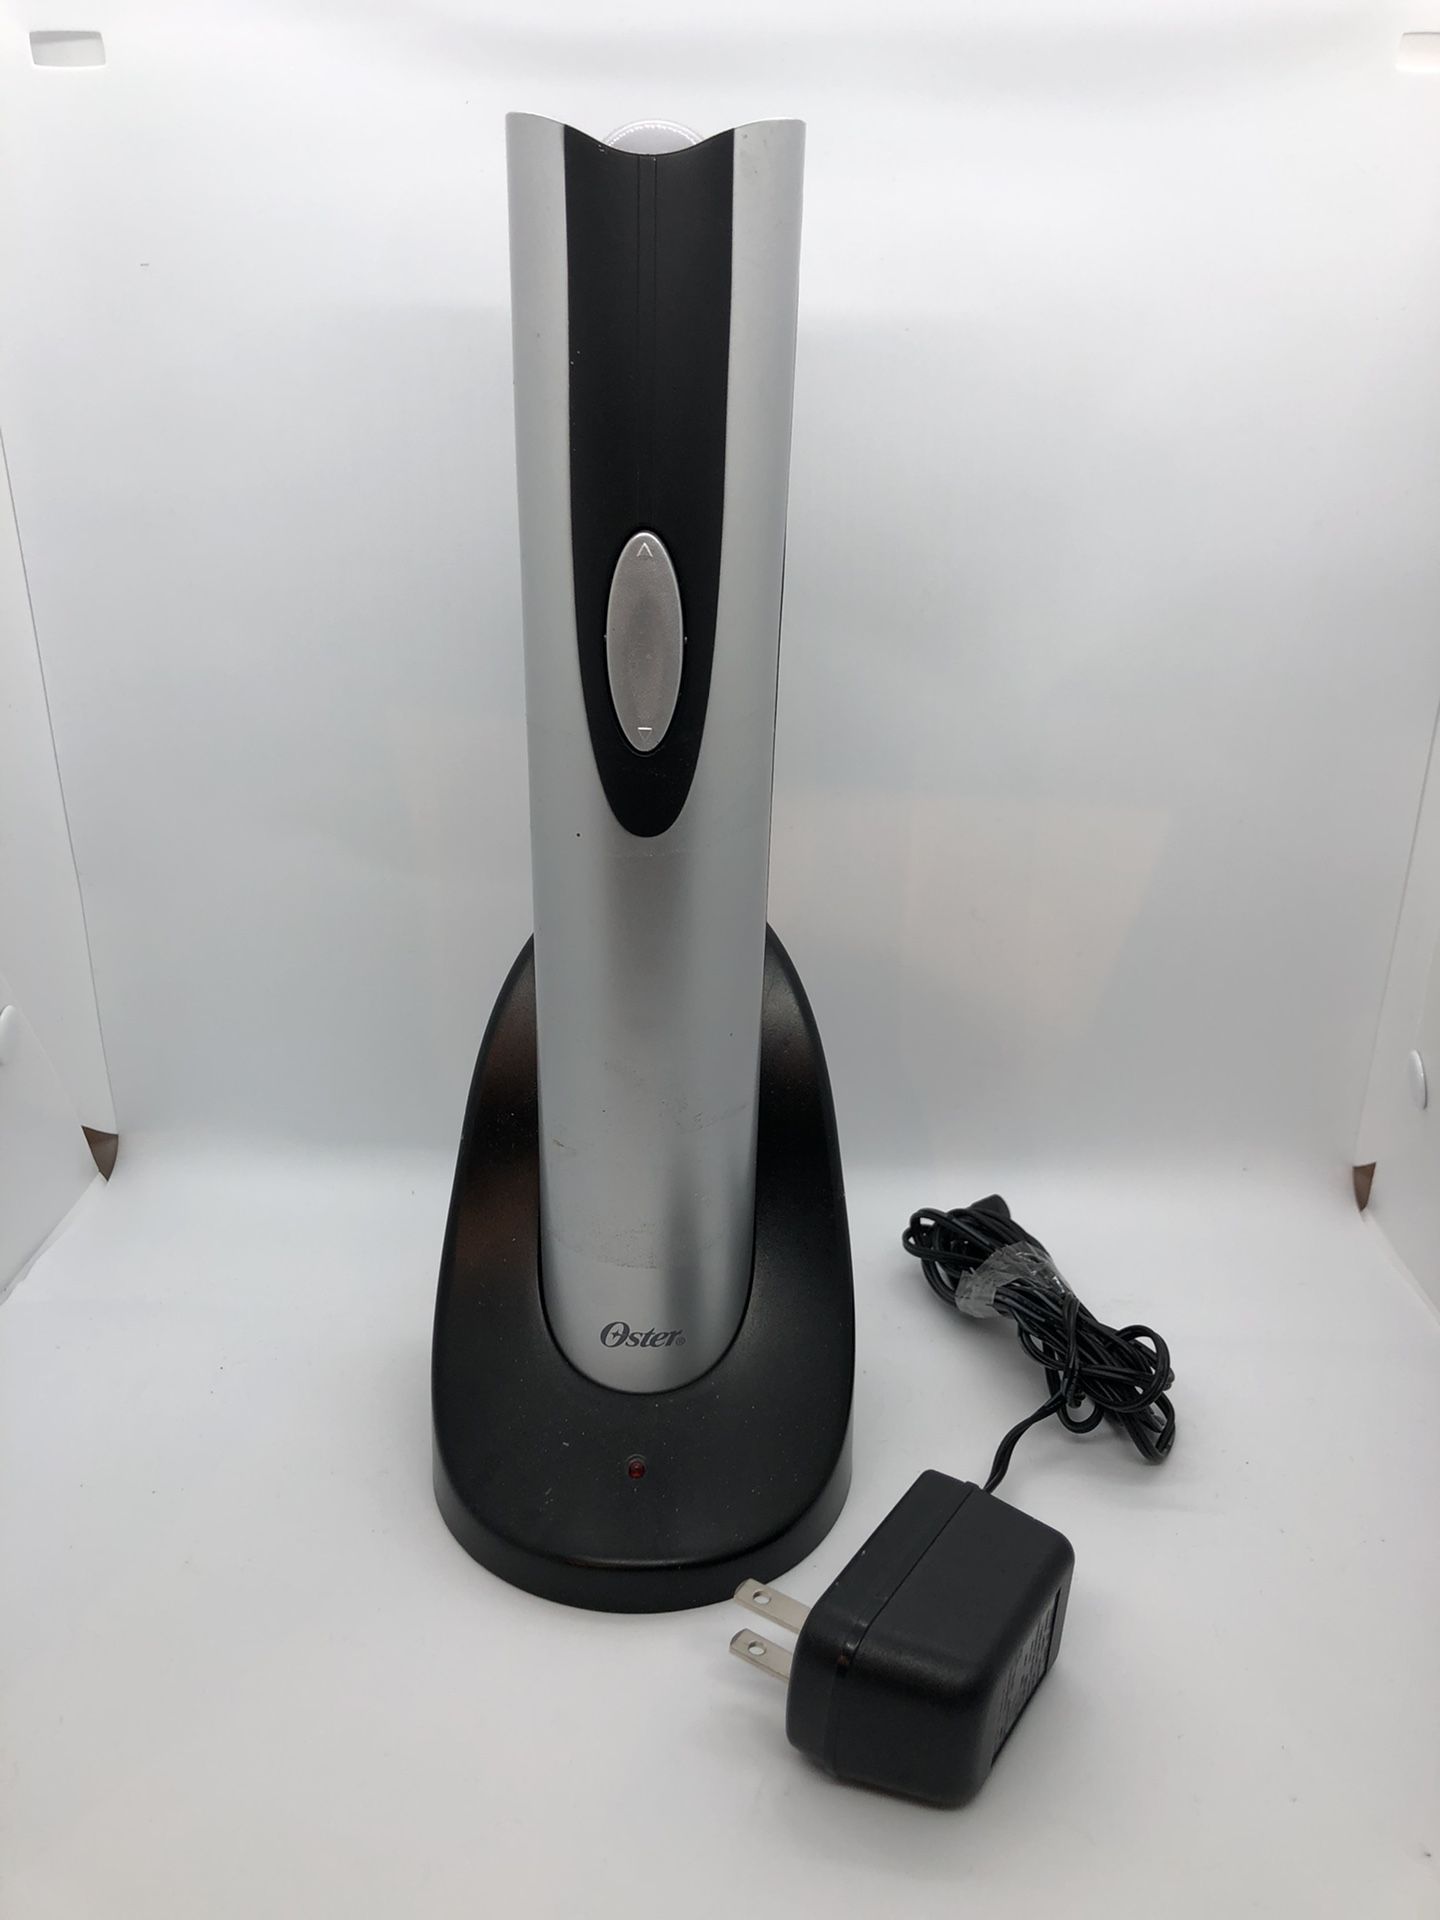 Oster electric wine bottle opener